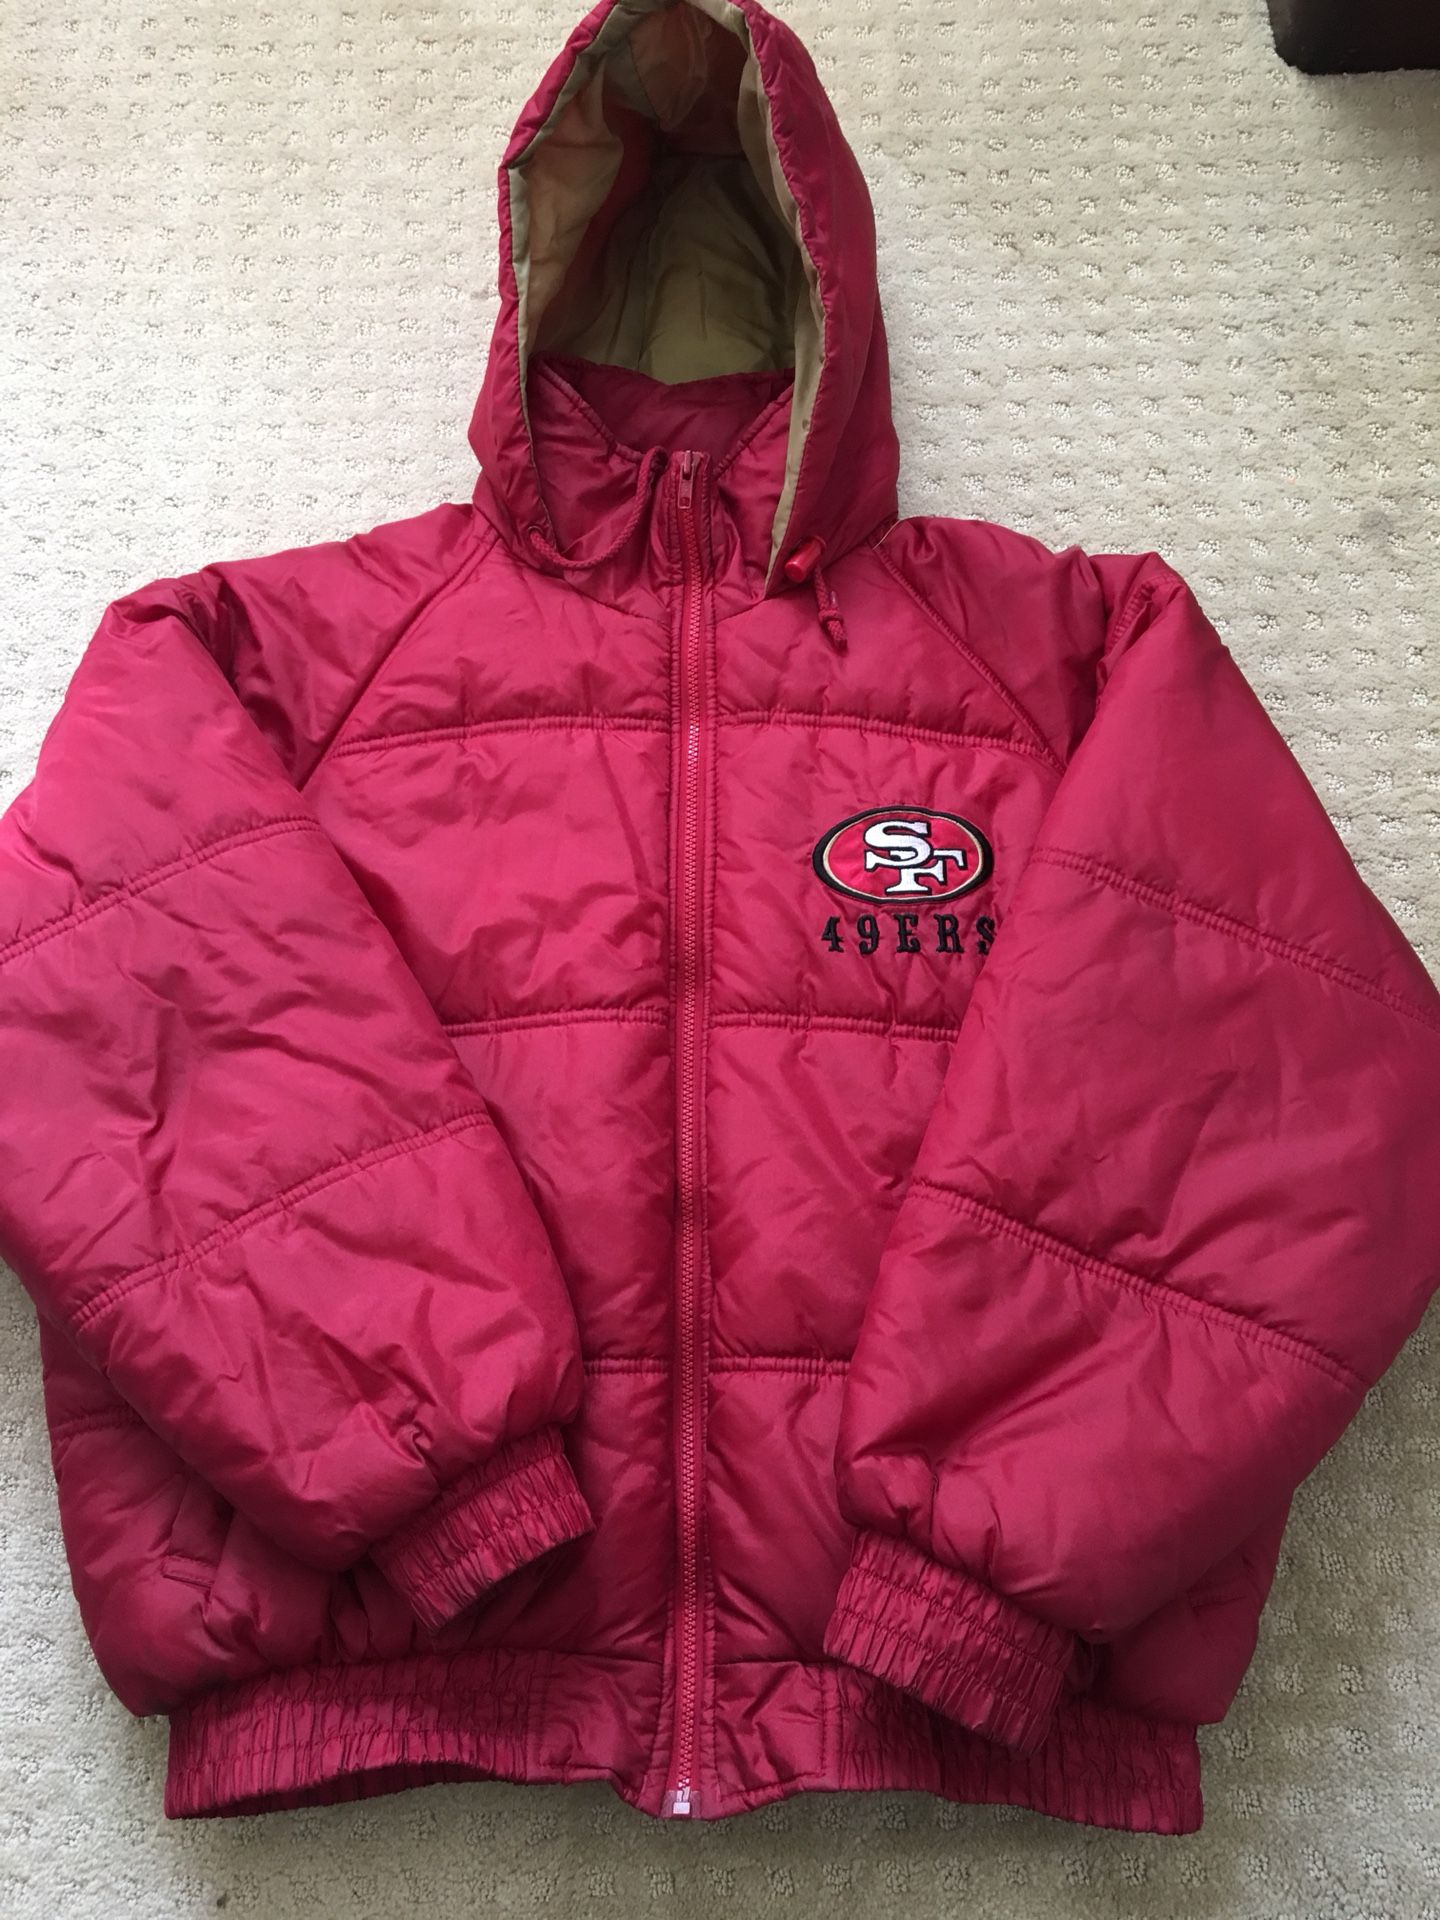 49ers Game Day Parka Jacket - Red/Gold - Size Large